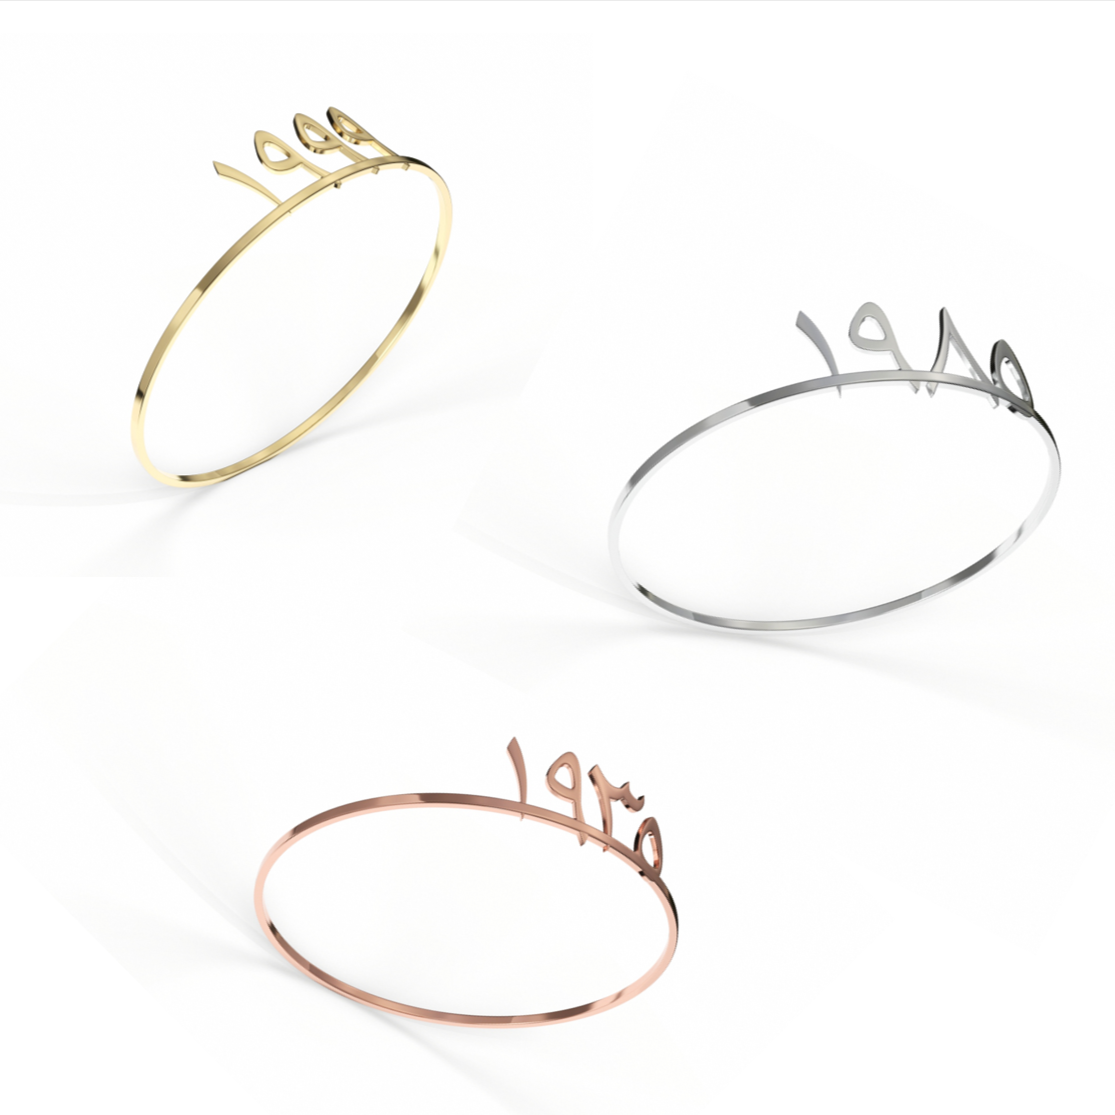 Customize your Numra Ring